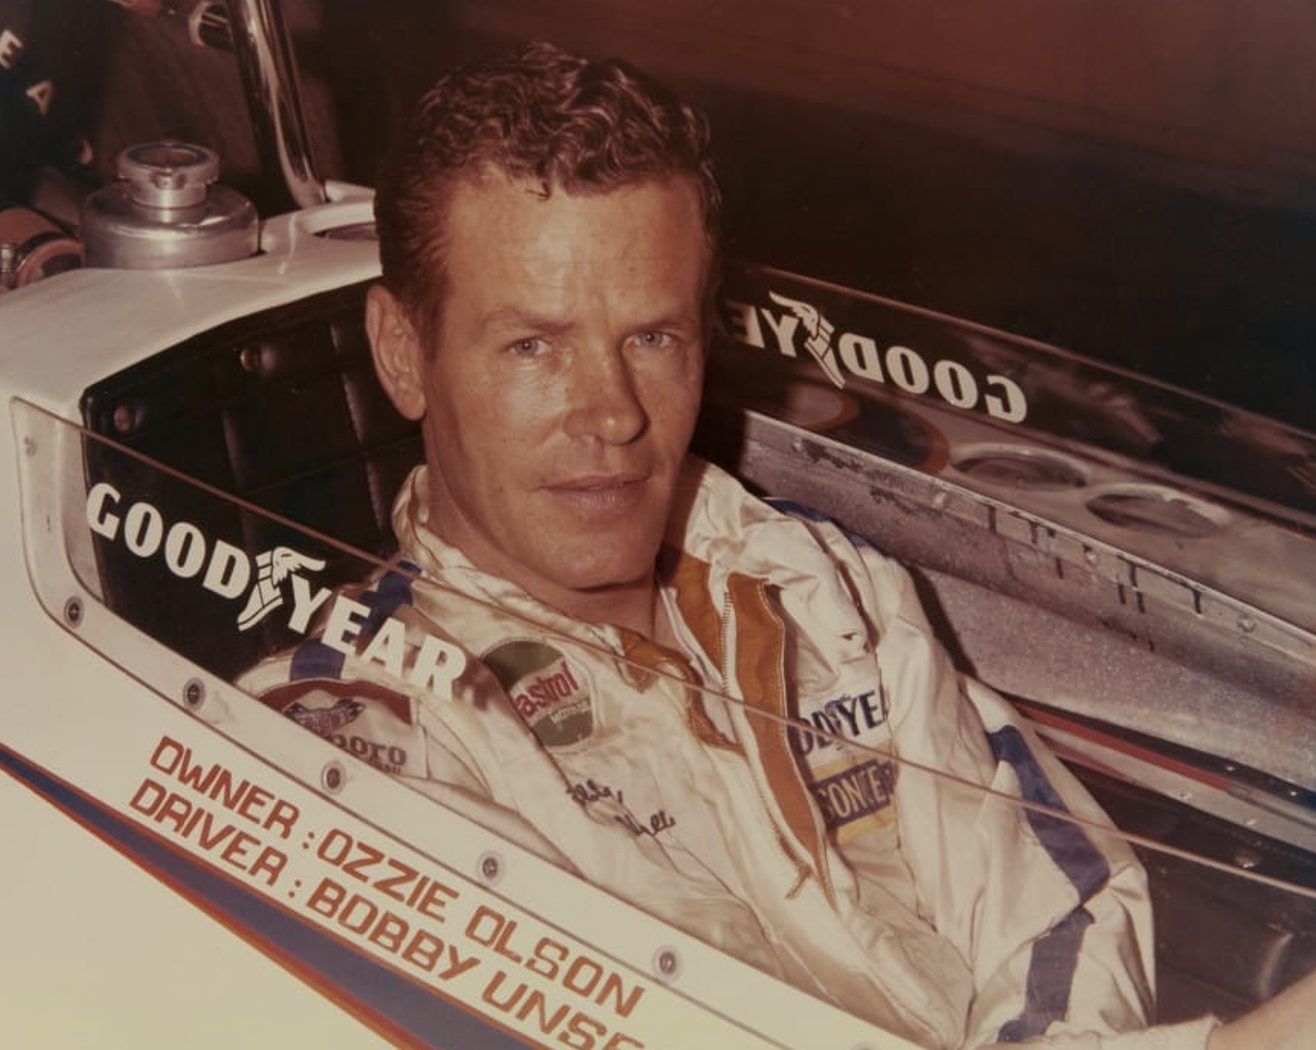 Photo: From the Collections of The Henry Ford. Gift of Bobby Unser. Imaged by Brian Wilson